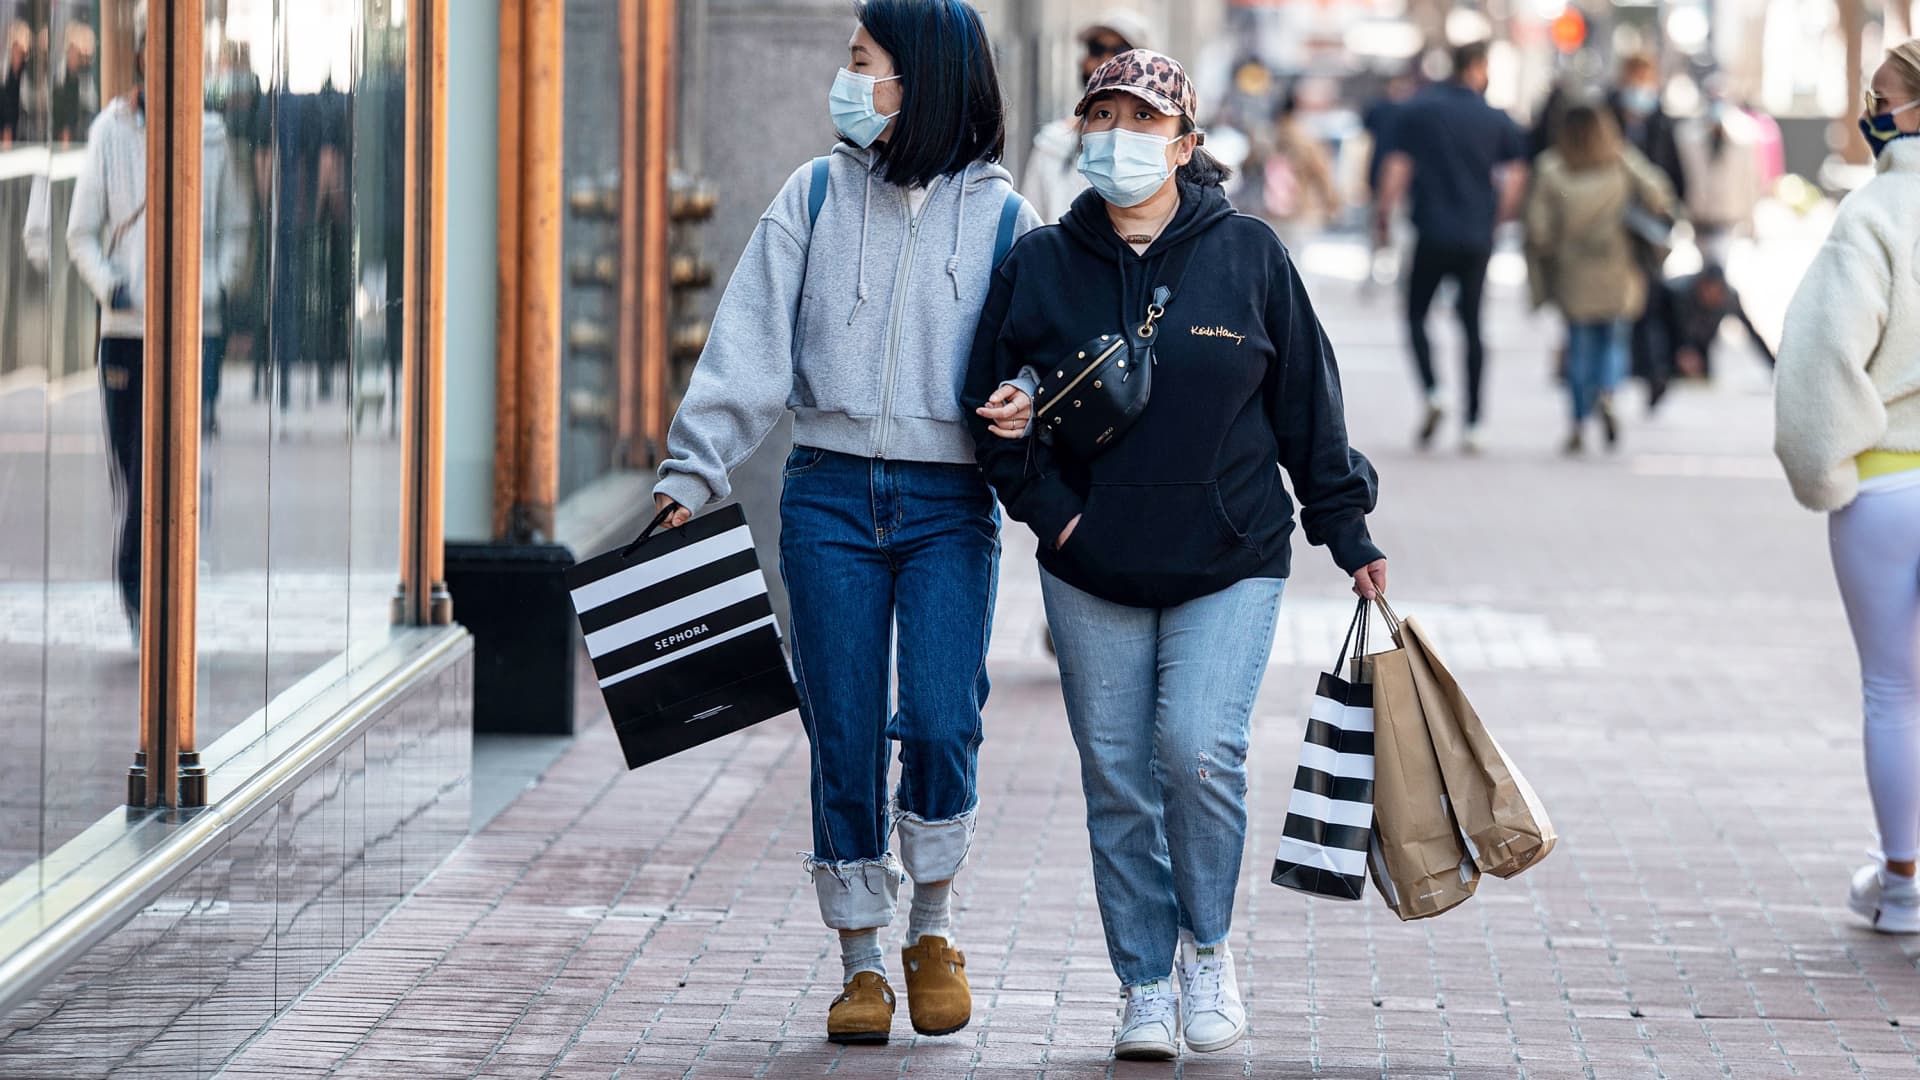 Shoppers wearing protective masks carry bags on Market Street in San Francisco, California, on Wednesday, April 14, 2021.